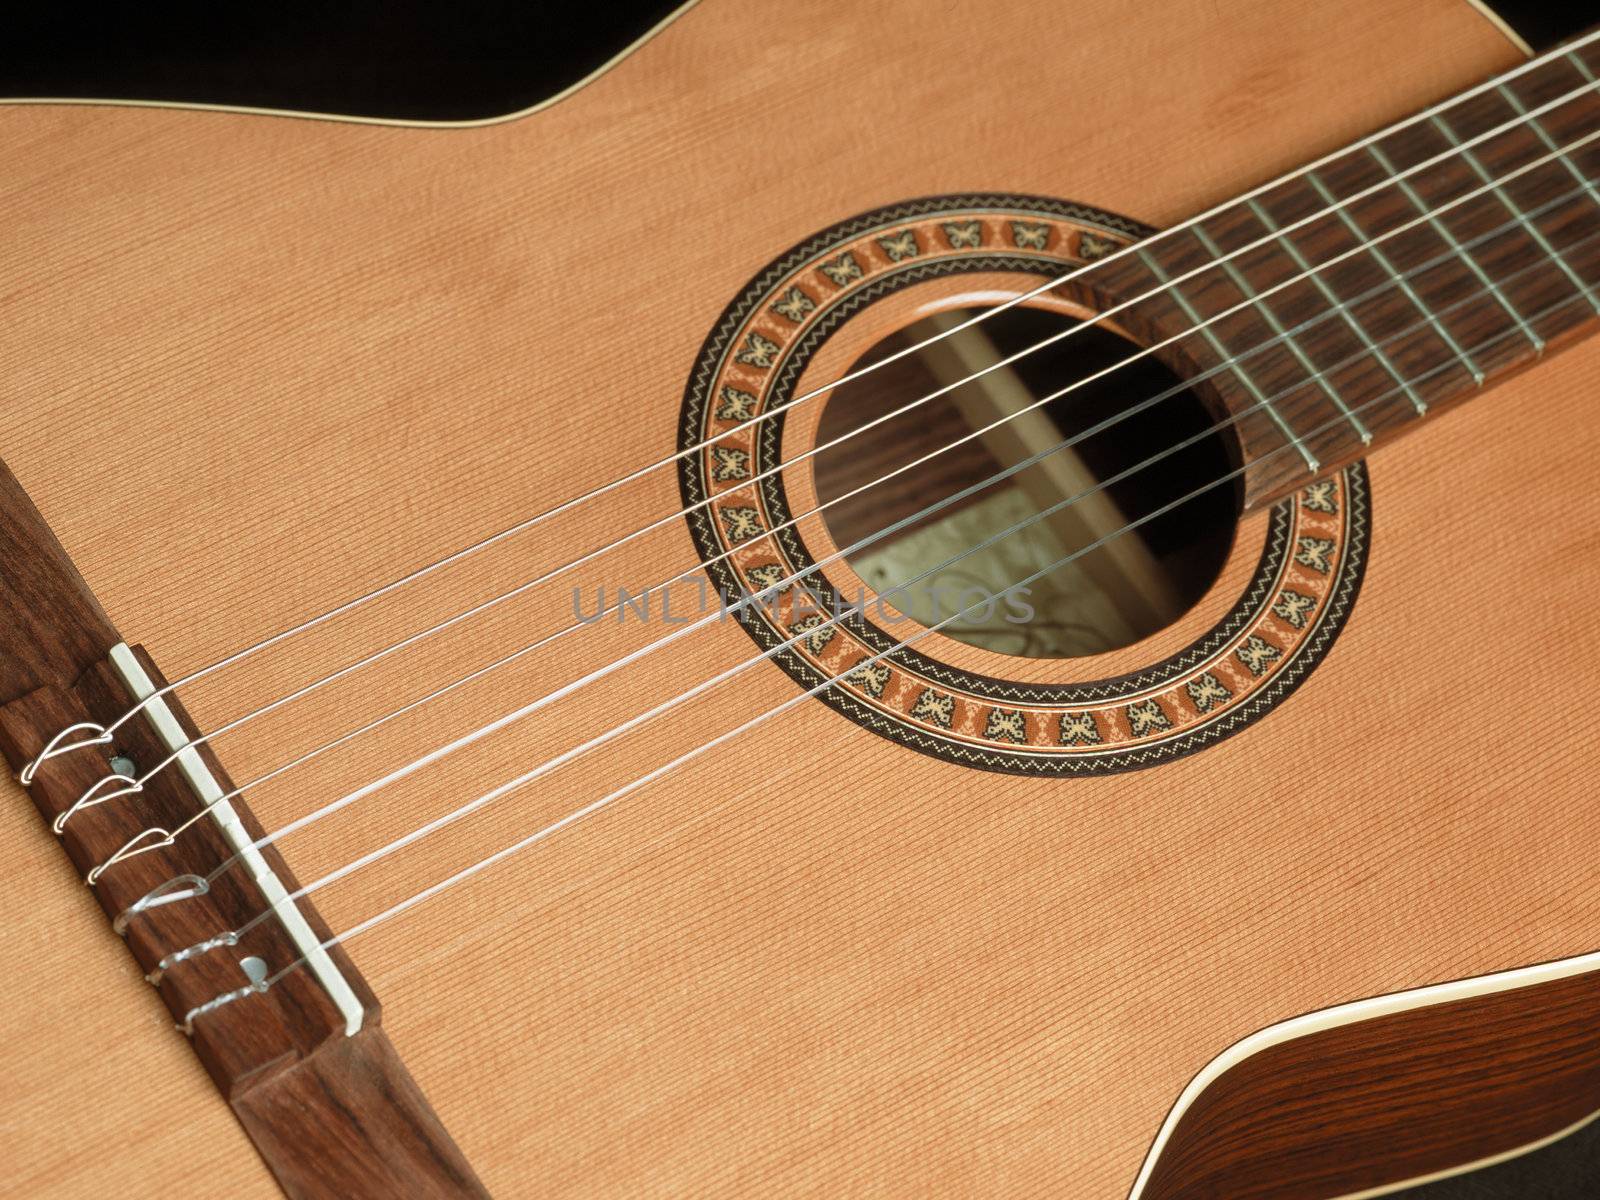 Classical guitar by sumners